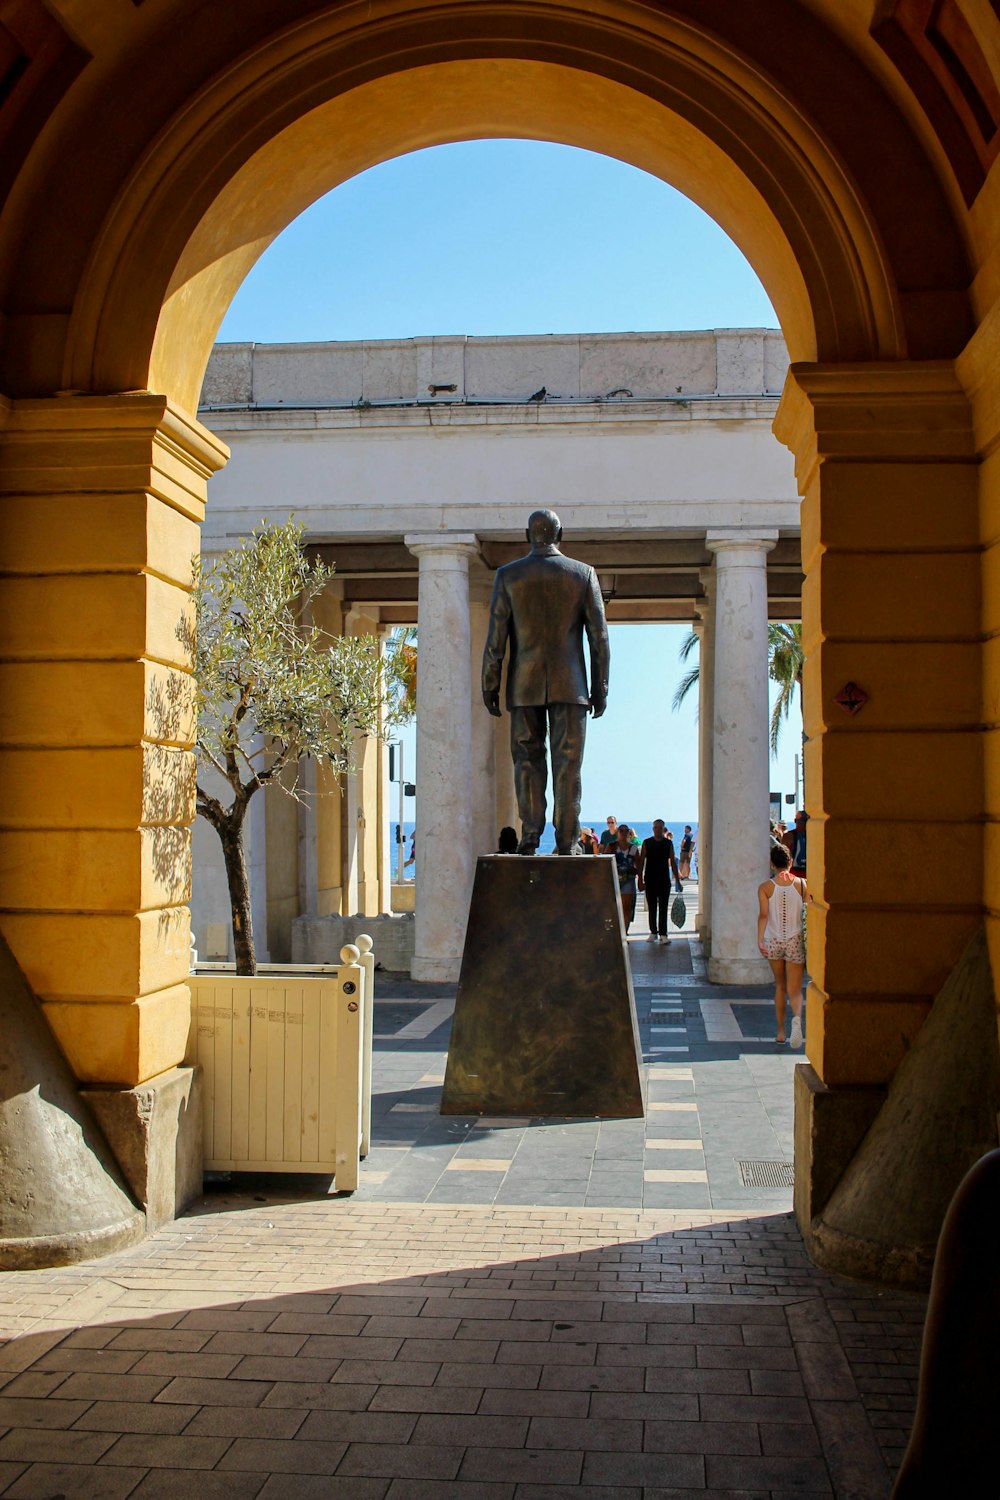 a statue of a man in a courtyard